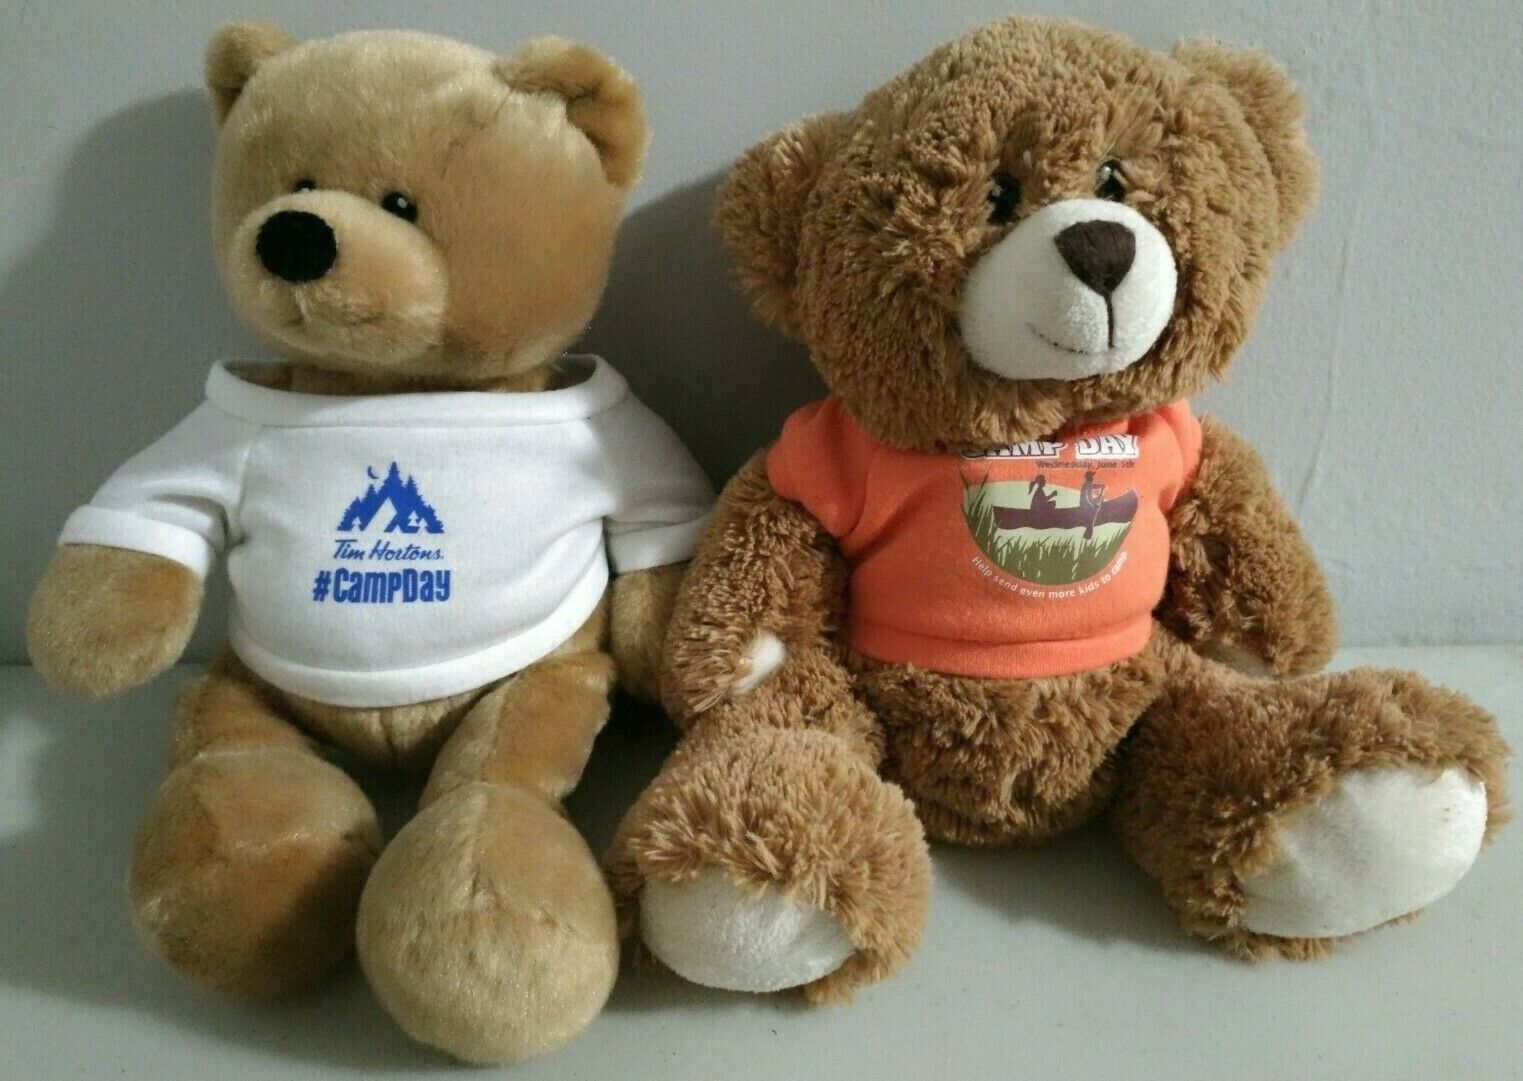 Lot of 2 Tim Hortons Coffee Camp Day Brown Teddy Bear 12 \